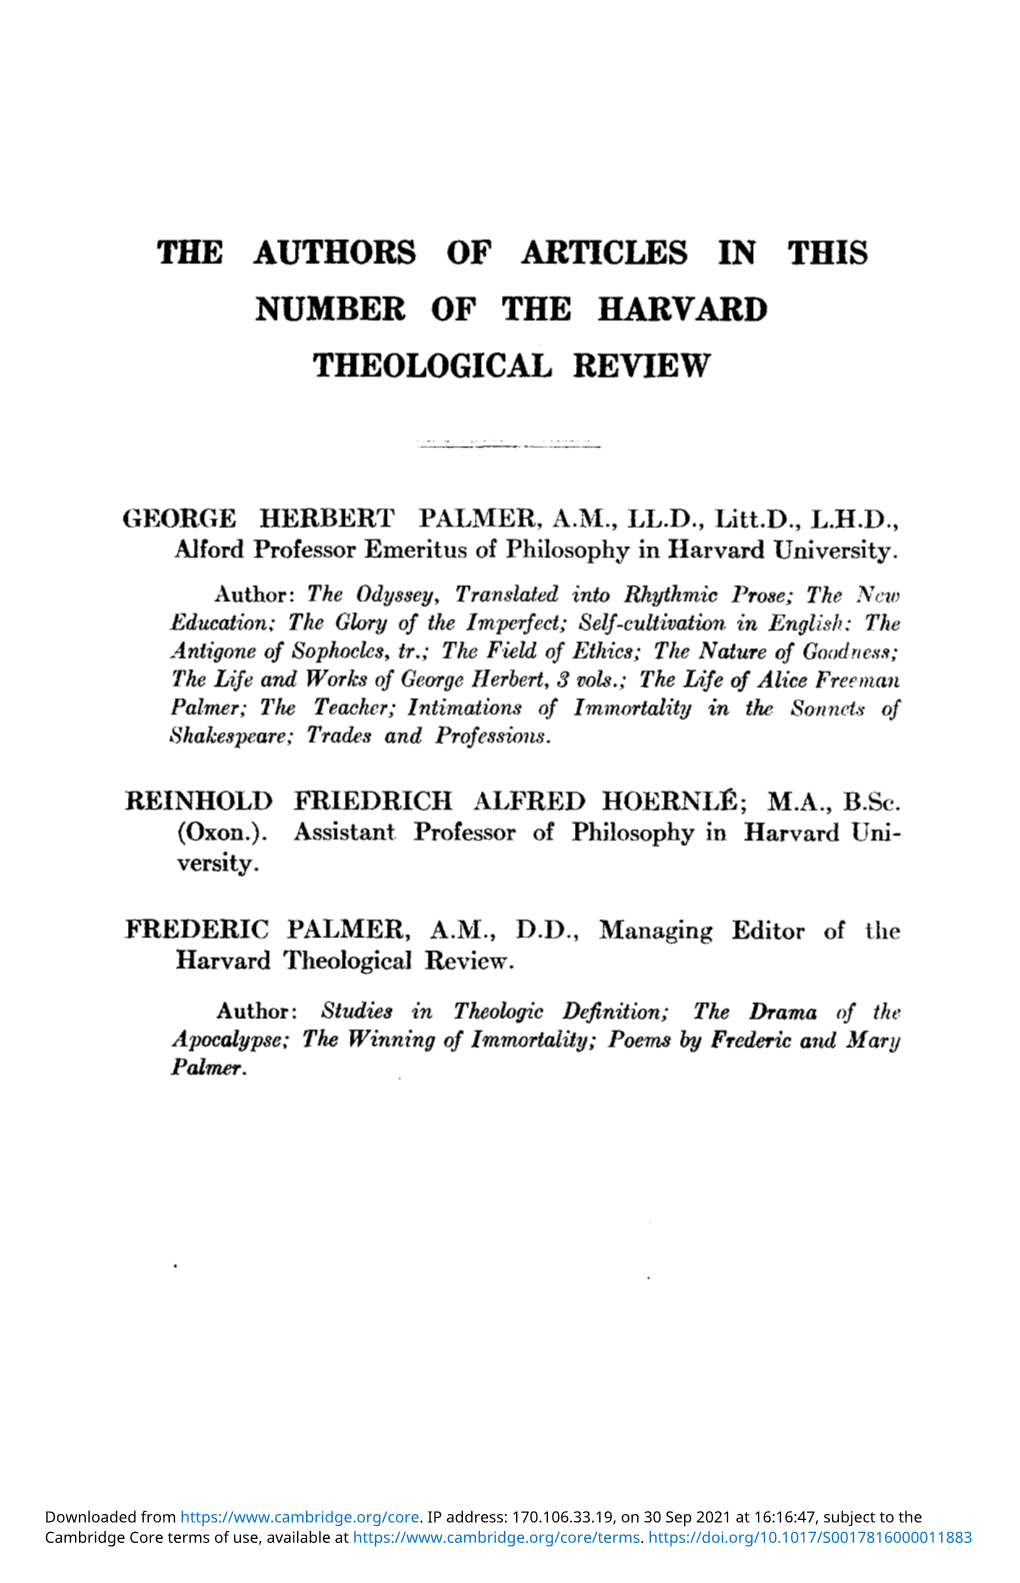 The Authors of Articles in This Number of the Harvard